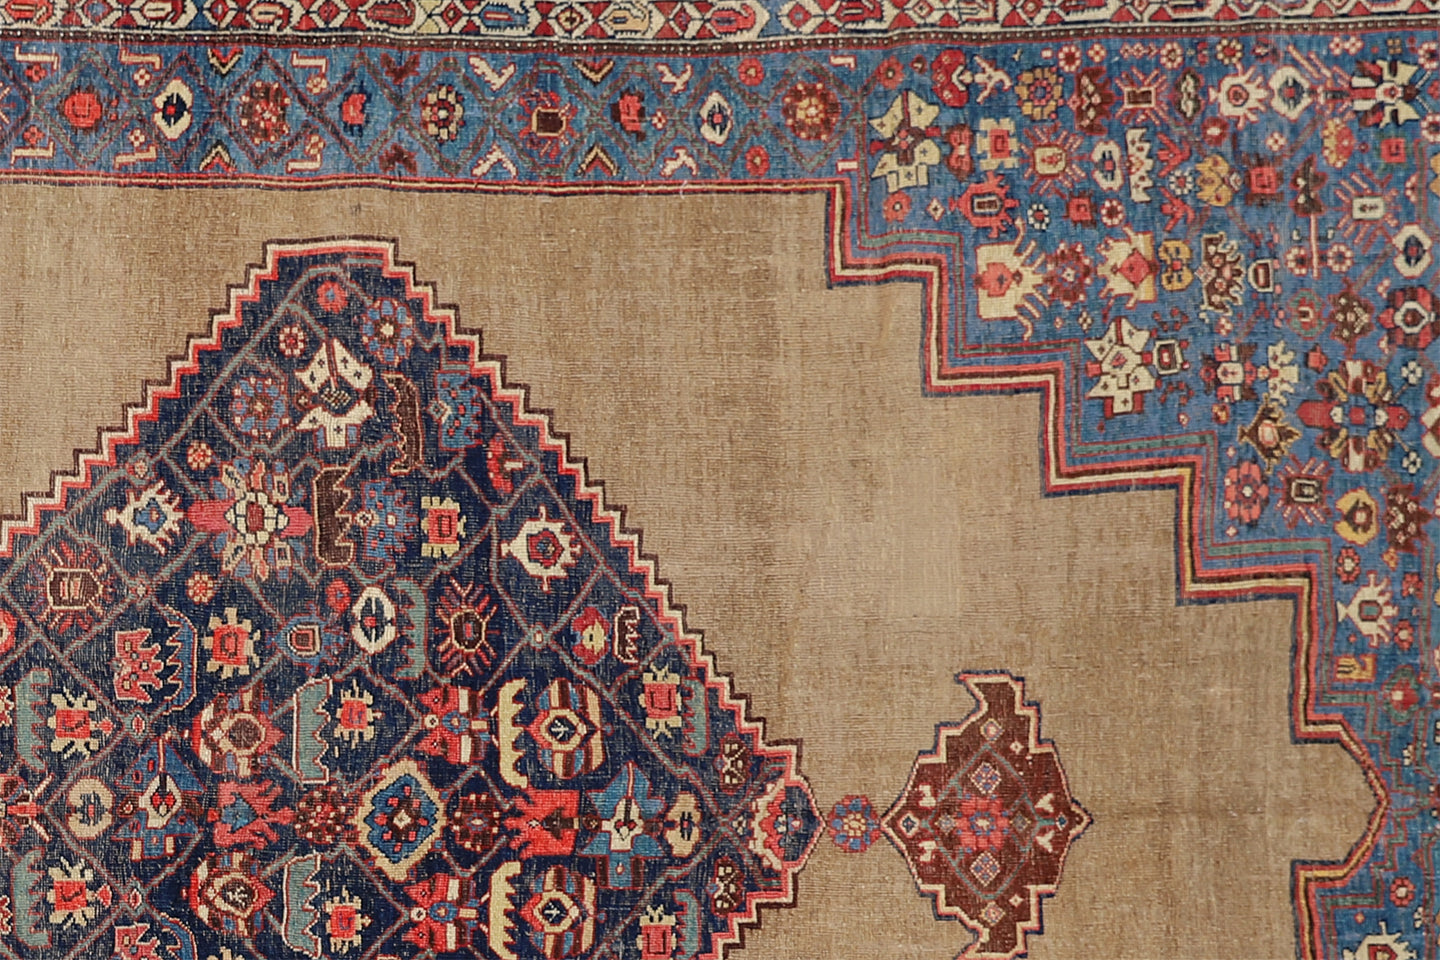 8'x11' All Wool Camel Hair Blue and Red Medalion Antique Halvai Bijar Rug